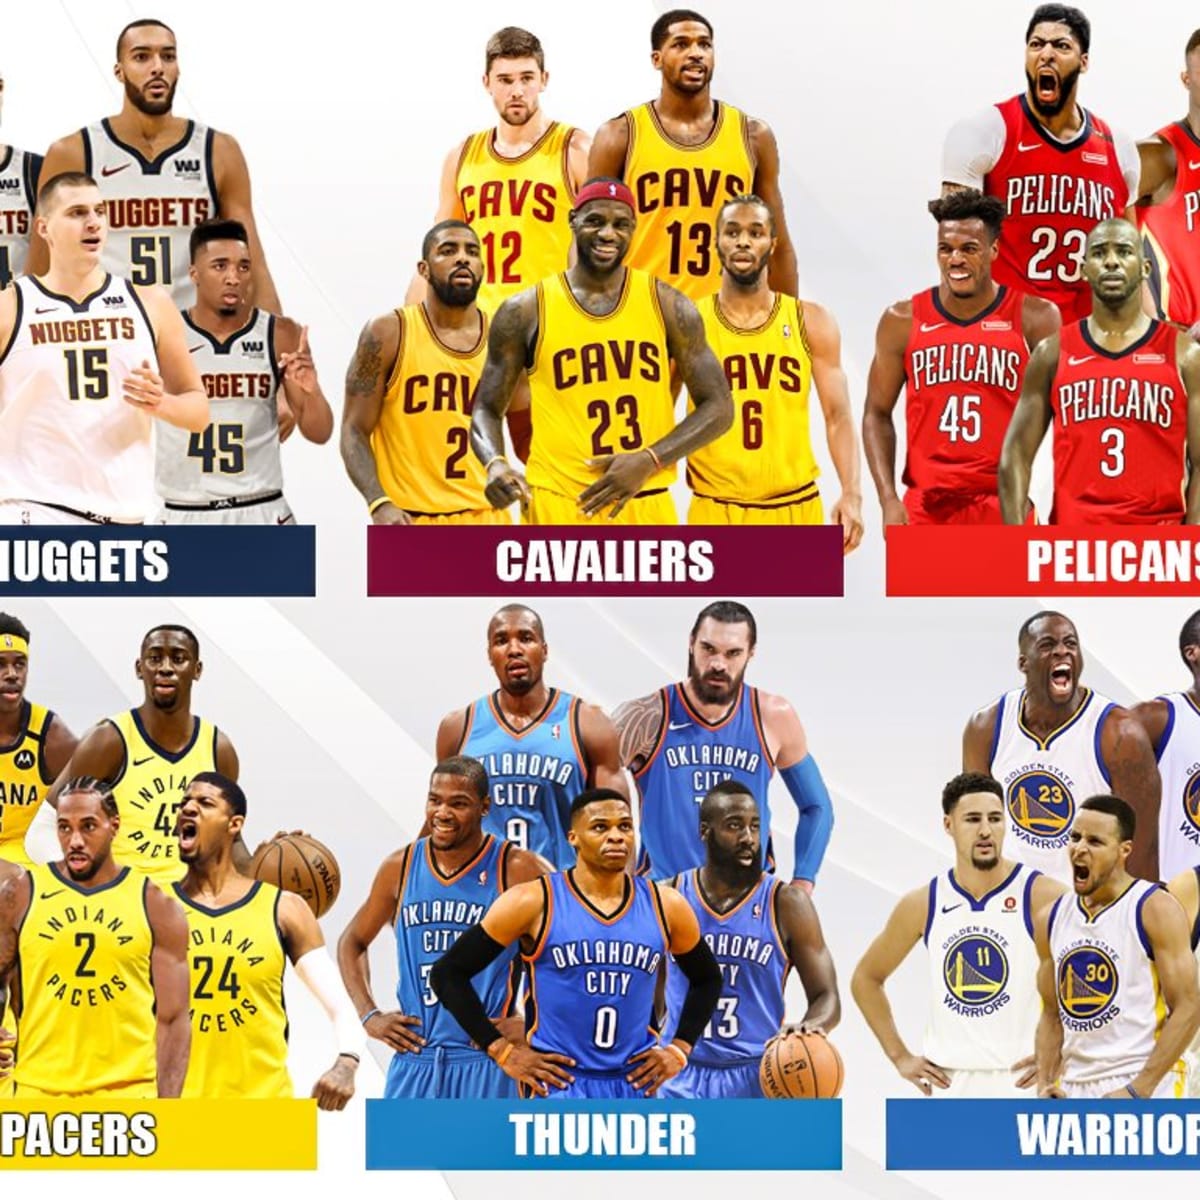 7 BEST NBA TEAMS IF EVERY PLAYER PLAYED FOR THE TEAM THAT DRAFTED